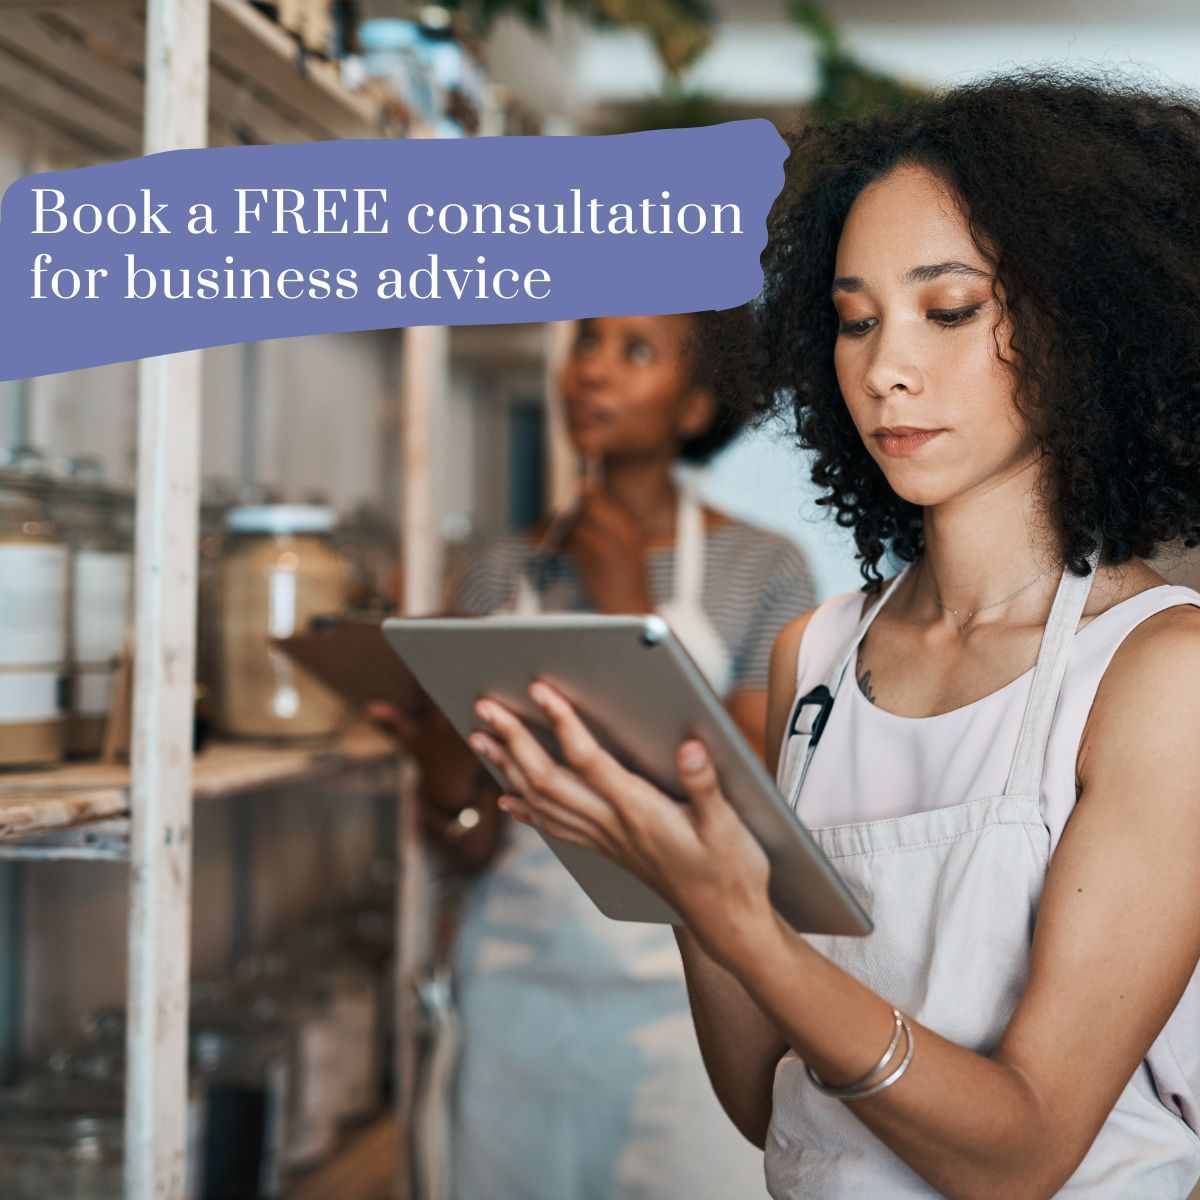 If you're a small business owner and need some business guidance, we offer a FREE initial consultation. Get in touch to book in your free consultation today.
#McColes #charteredaccountant #accounting #accountant #smallbusiness #smallbusinessowner #northherts #hertshour